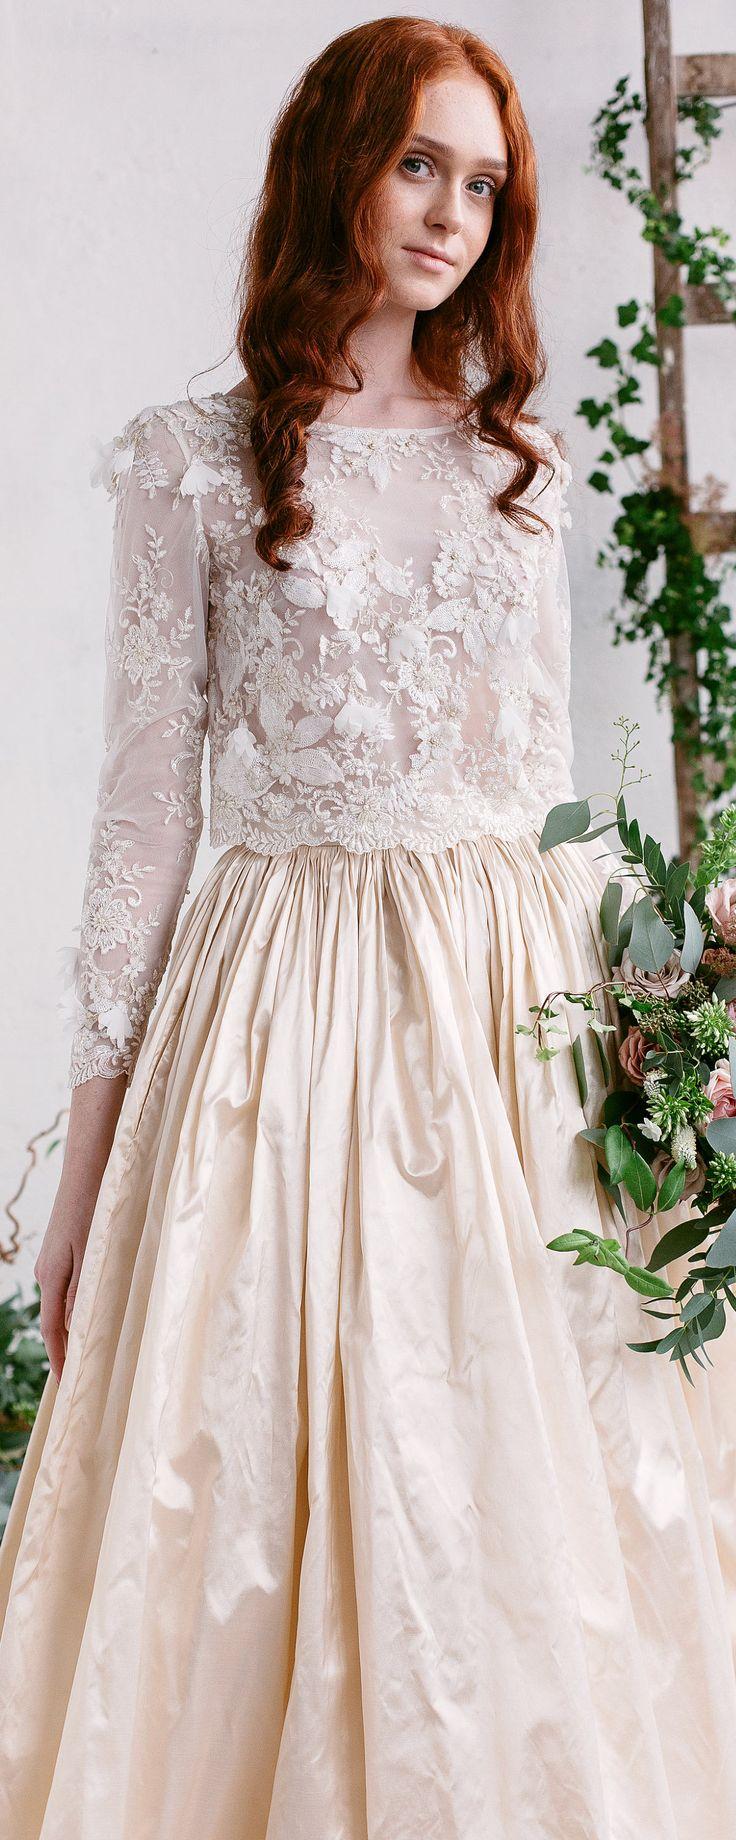 lace wedding top